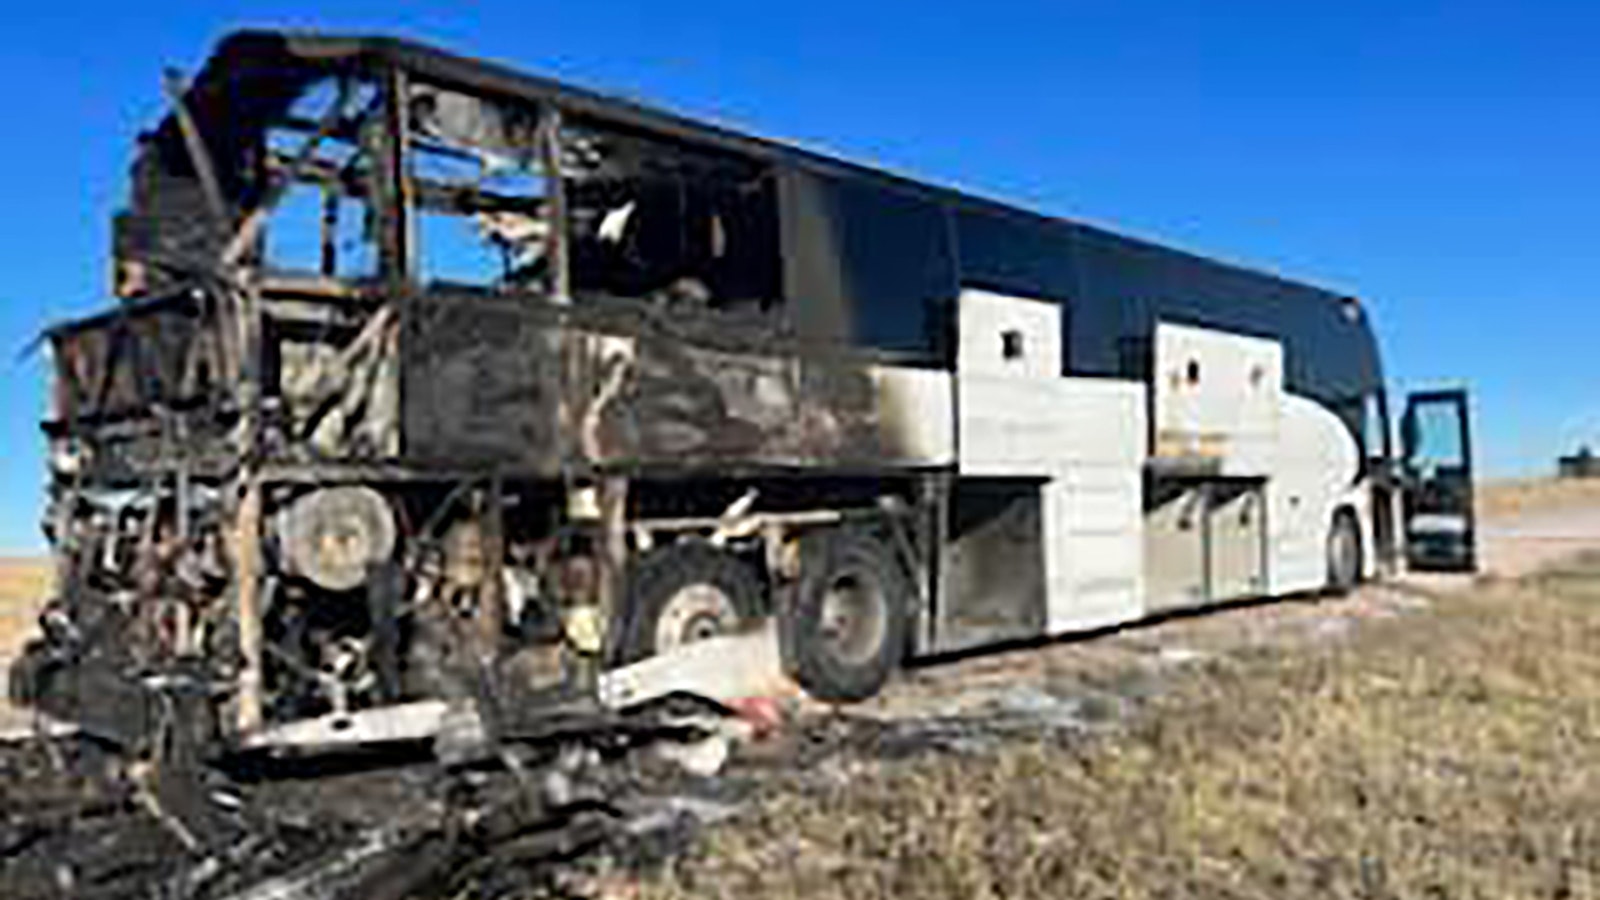 A fire that burned up a bus carrying the South Dakota School of Mines football team's defense appears to have started in the engine.